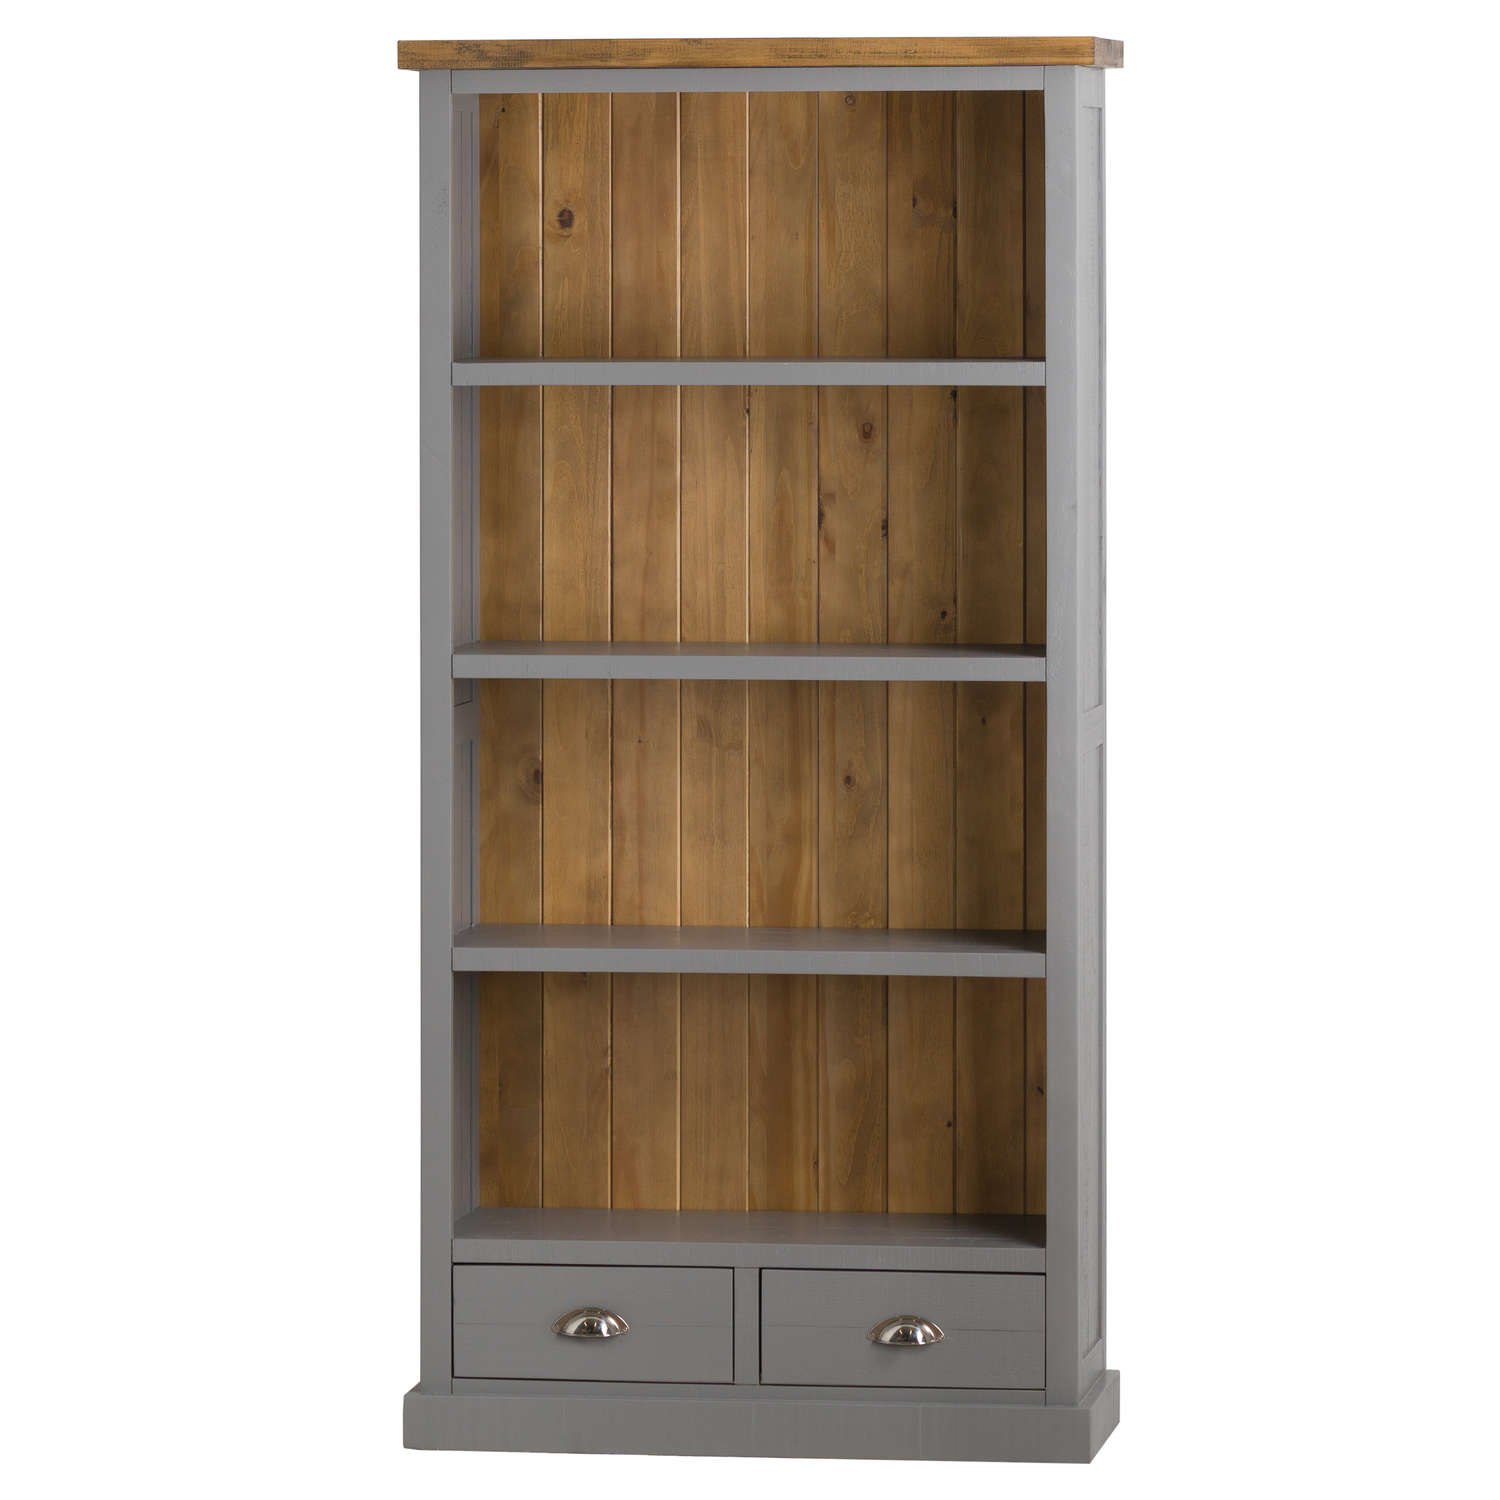 The Byland Collection Two Drawer Bookcase